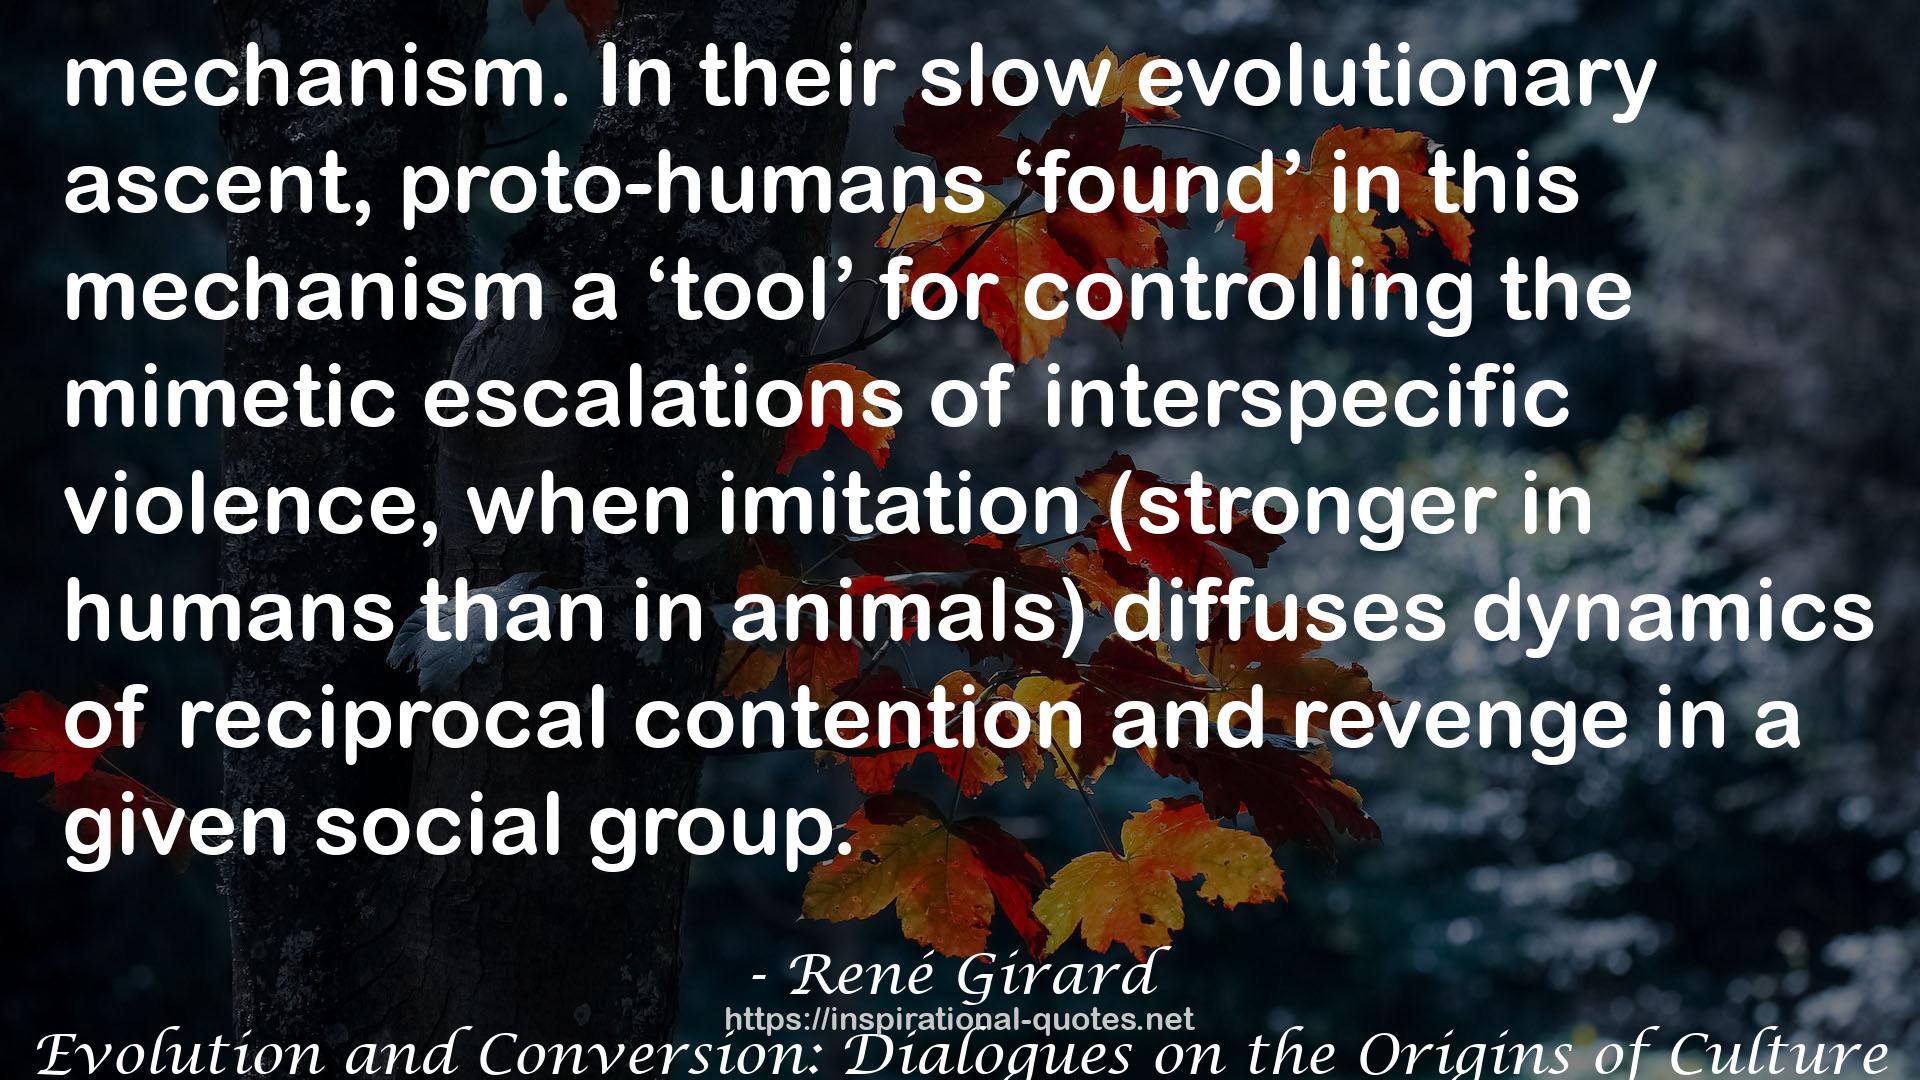 Evolution and Conversion: Dialogues on the Origins of Culture QUOTES